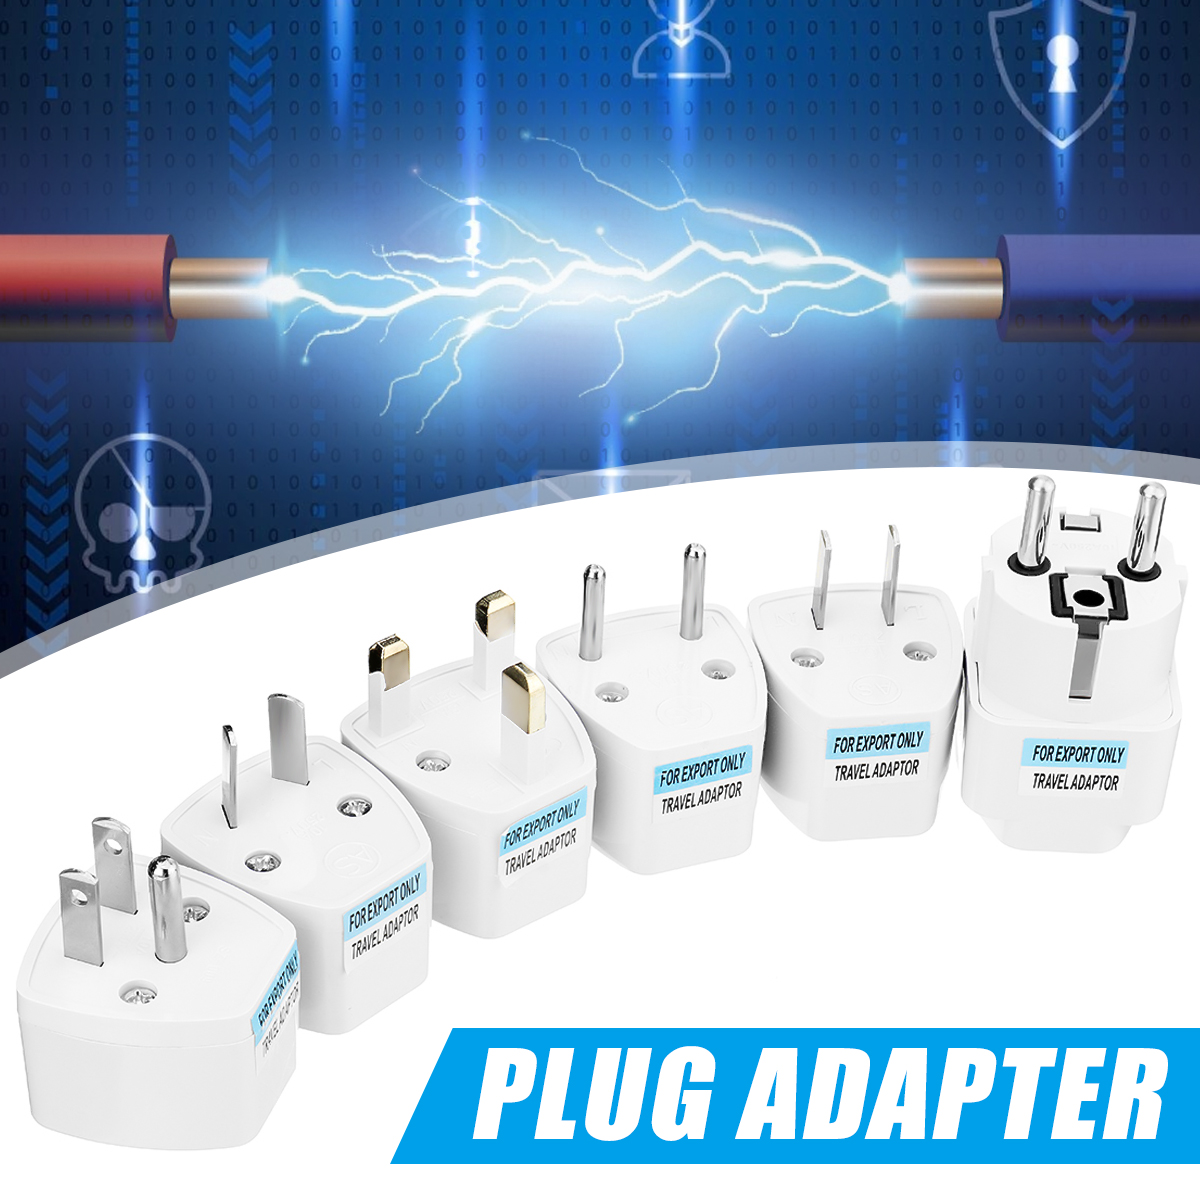 Global-Universal-Adapter-Plug-Adapter-Charger-Travel-Wall-AC-Power-Charger-Outlet-Adapter-Converter-1812356-4